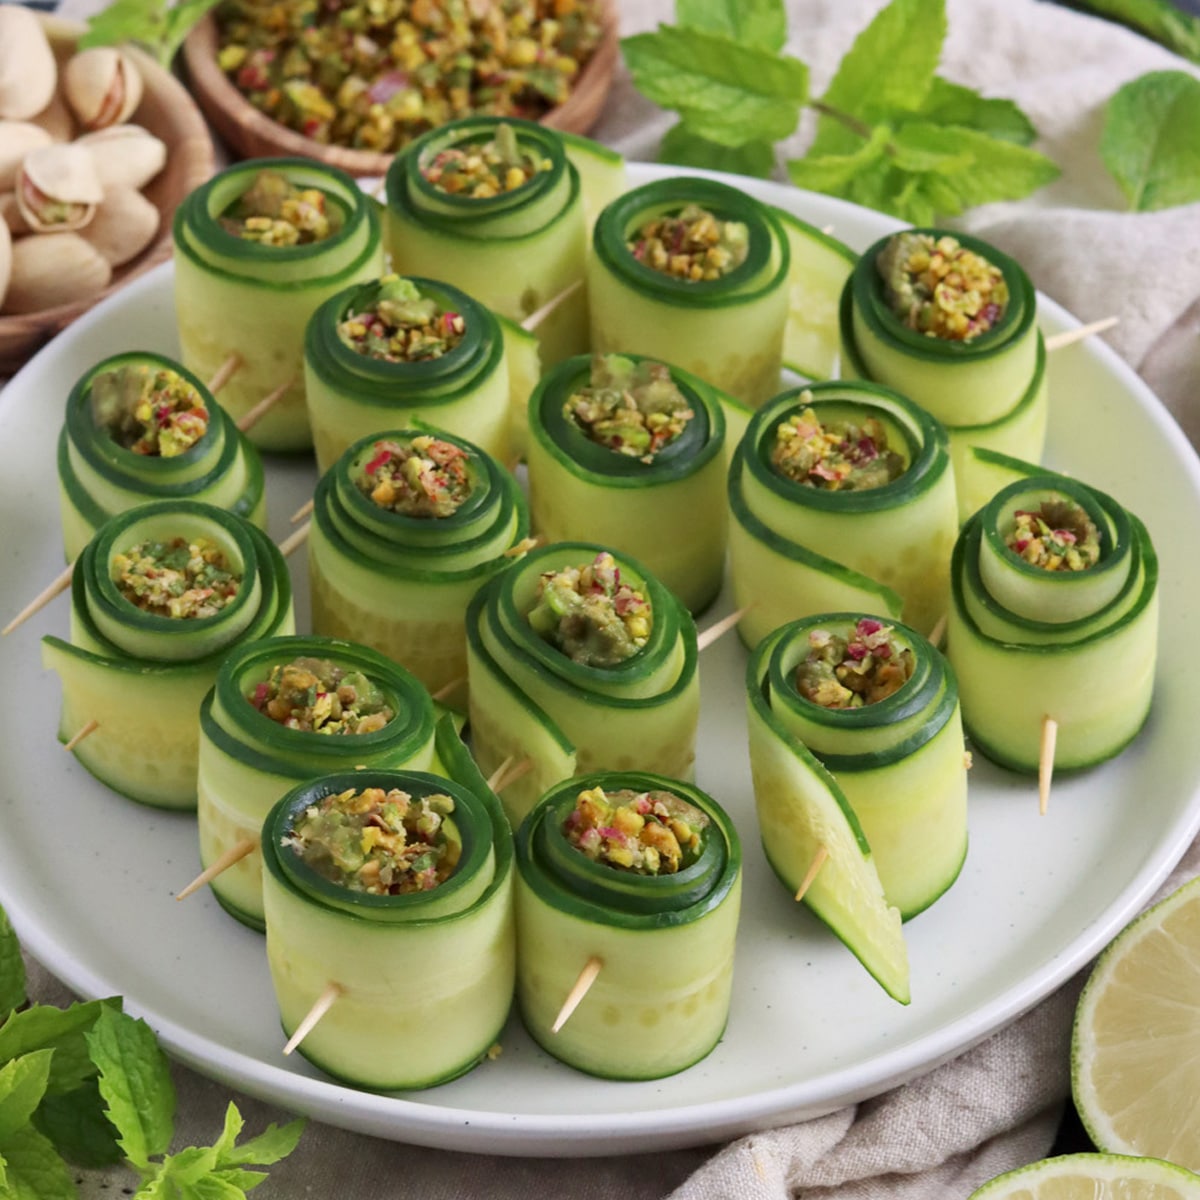 Close up of plate filled with cucumber rollups filled with pistachio and avocado.